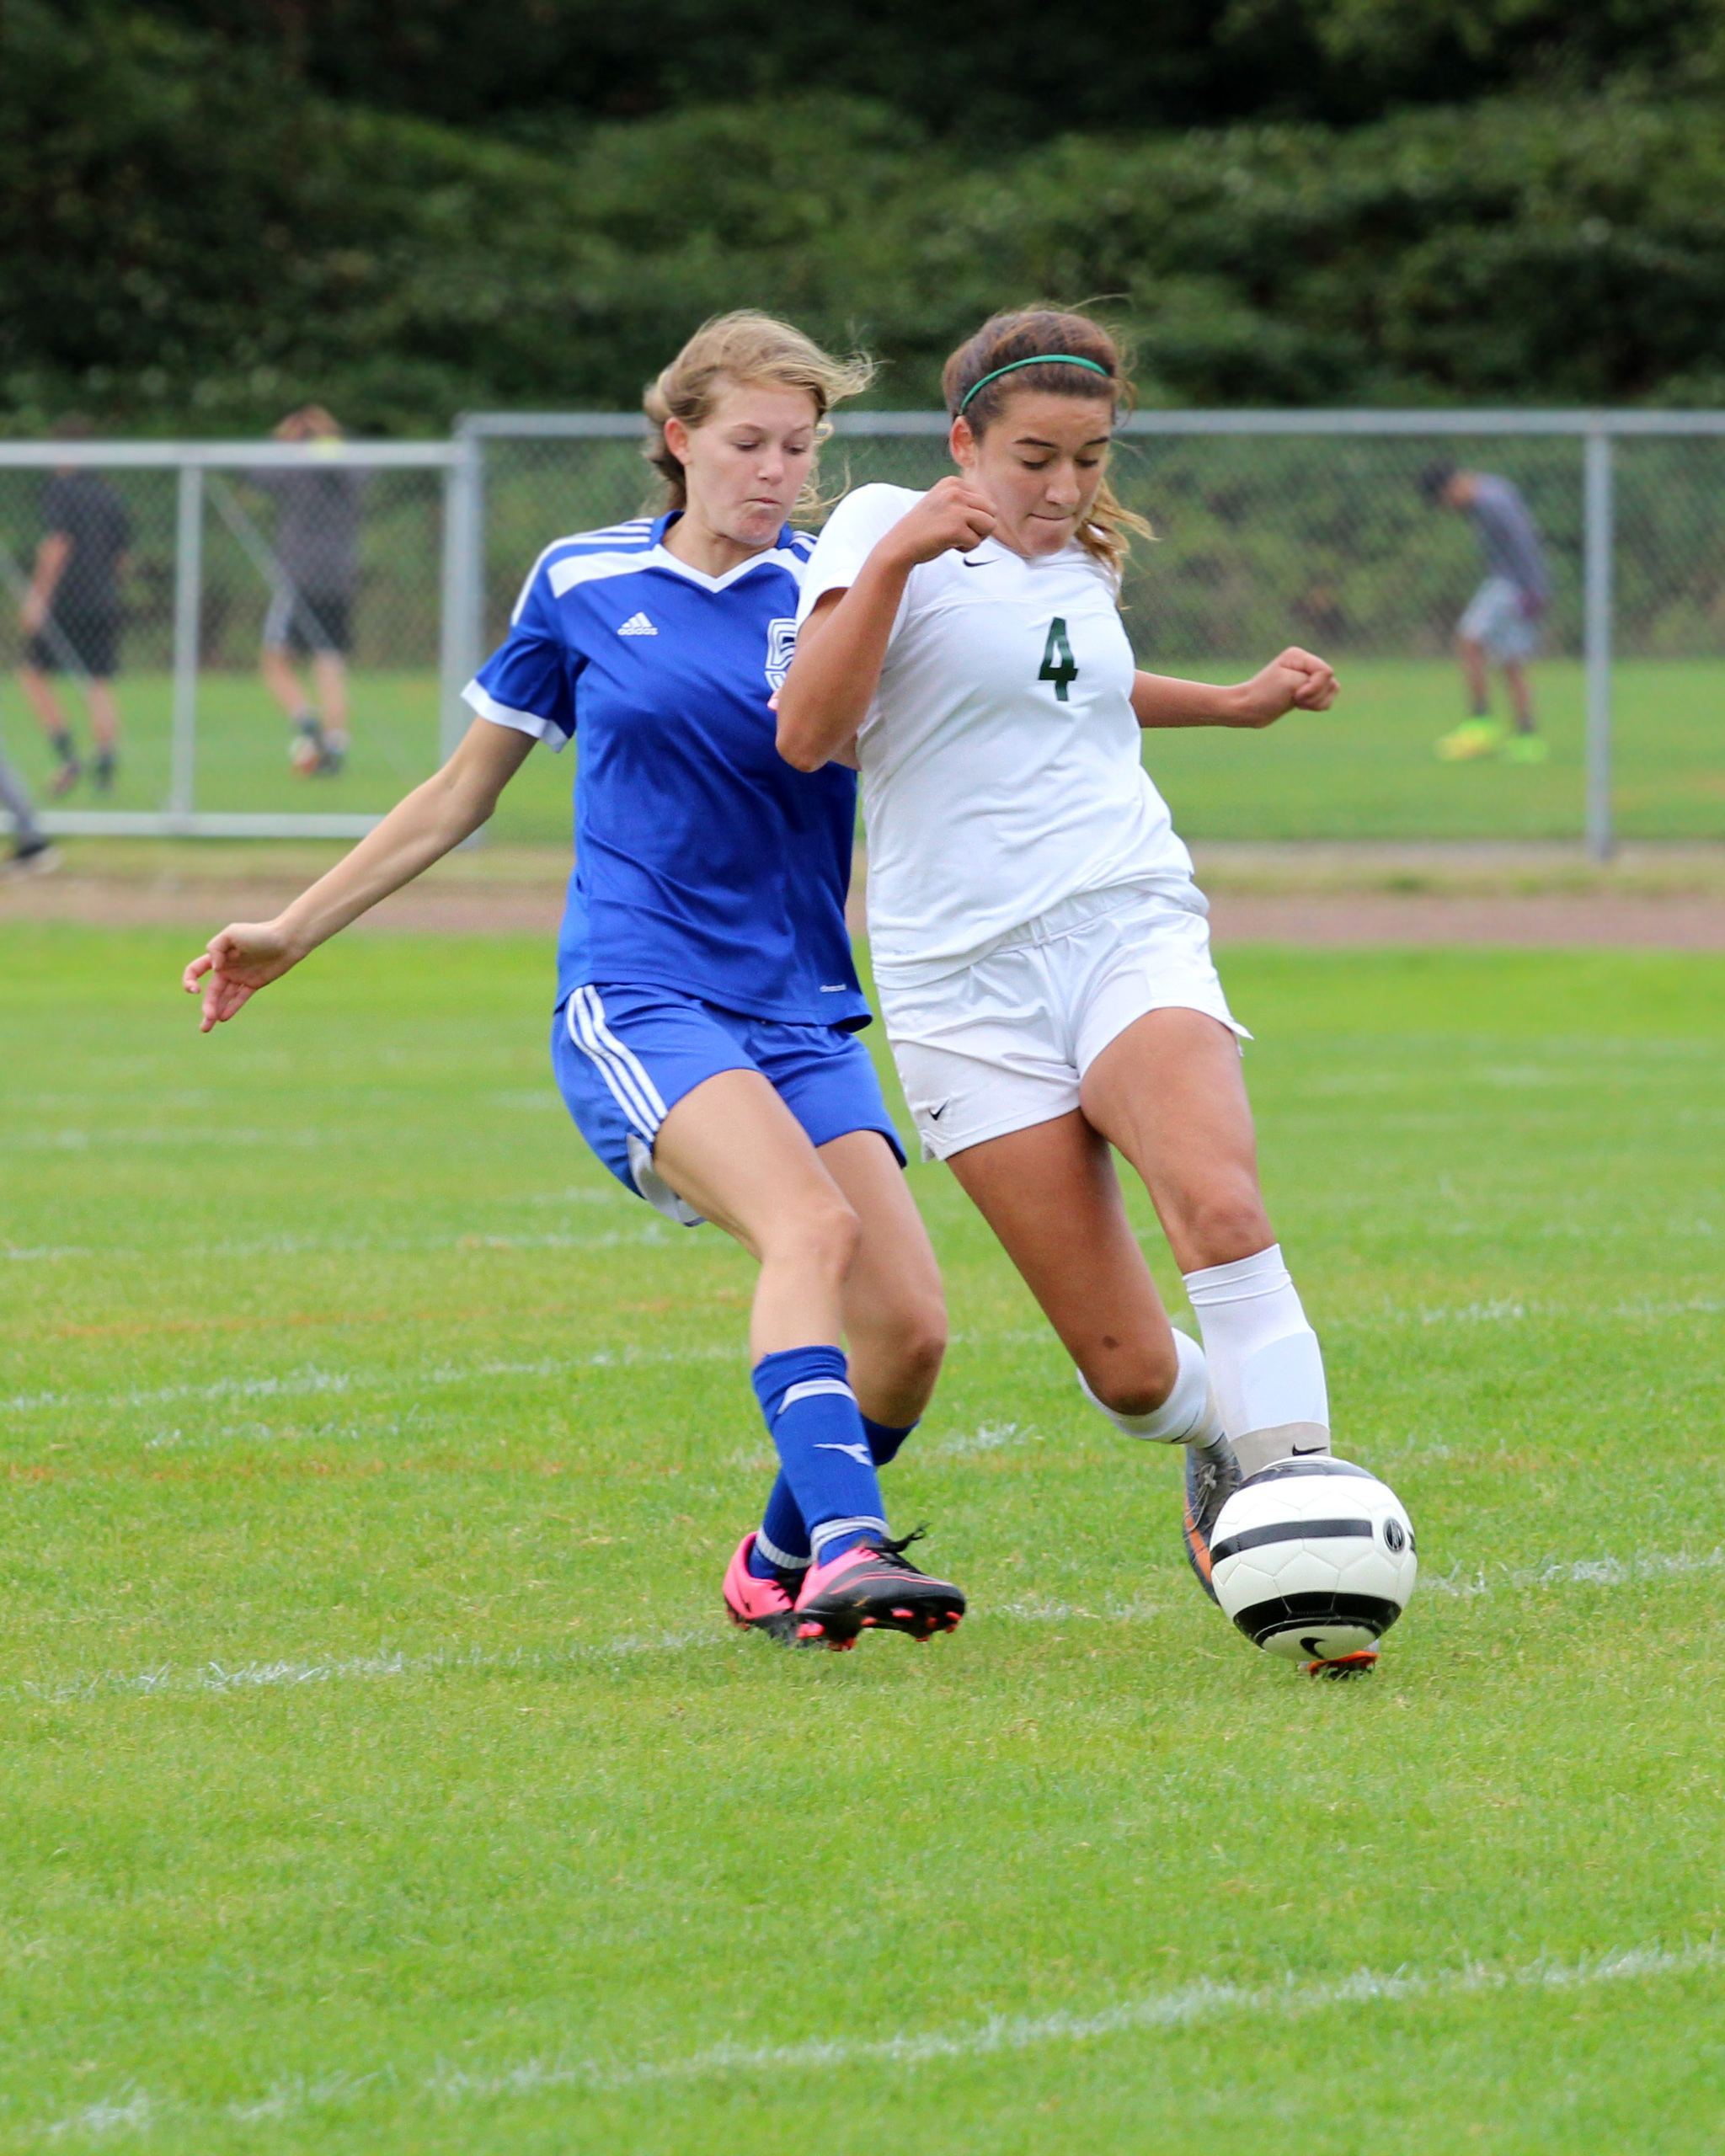 Vashon’s Dalia Aladin beats her Bellevue Christian opponent to the ball in Saturday’s game.